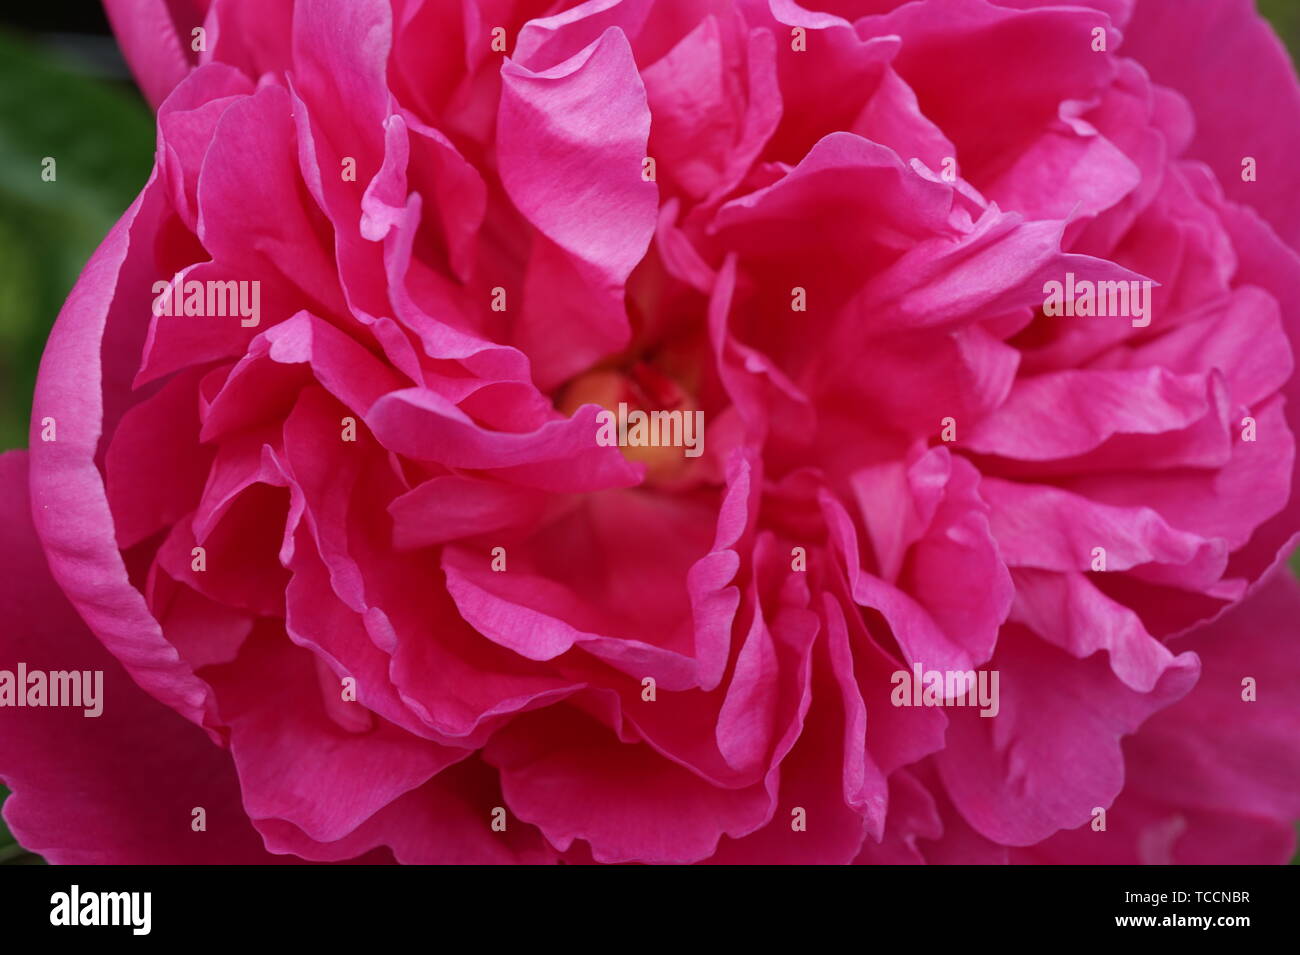 Pink peonies fully blossomed in close-up view Stock Photo